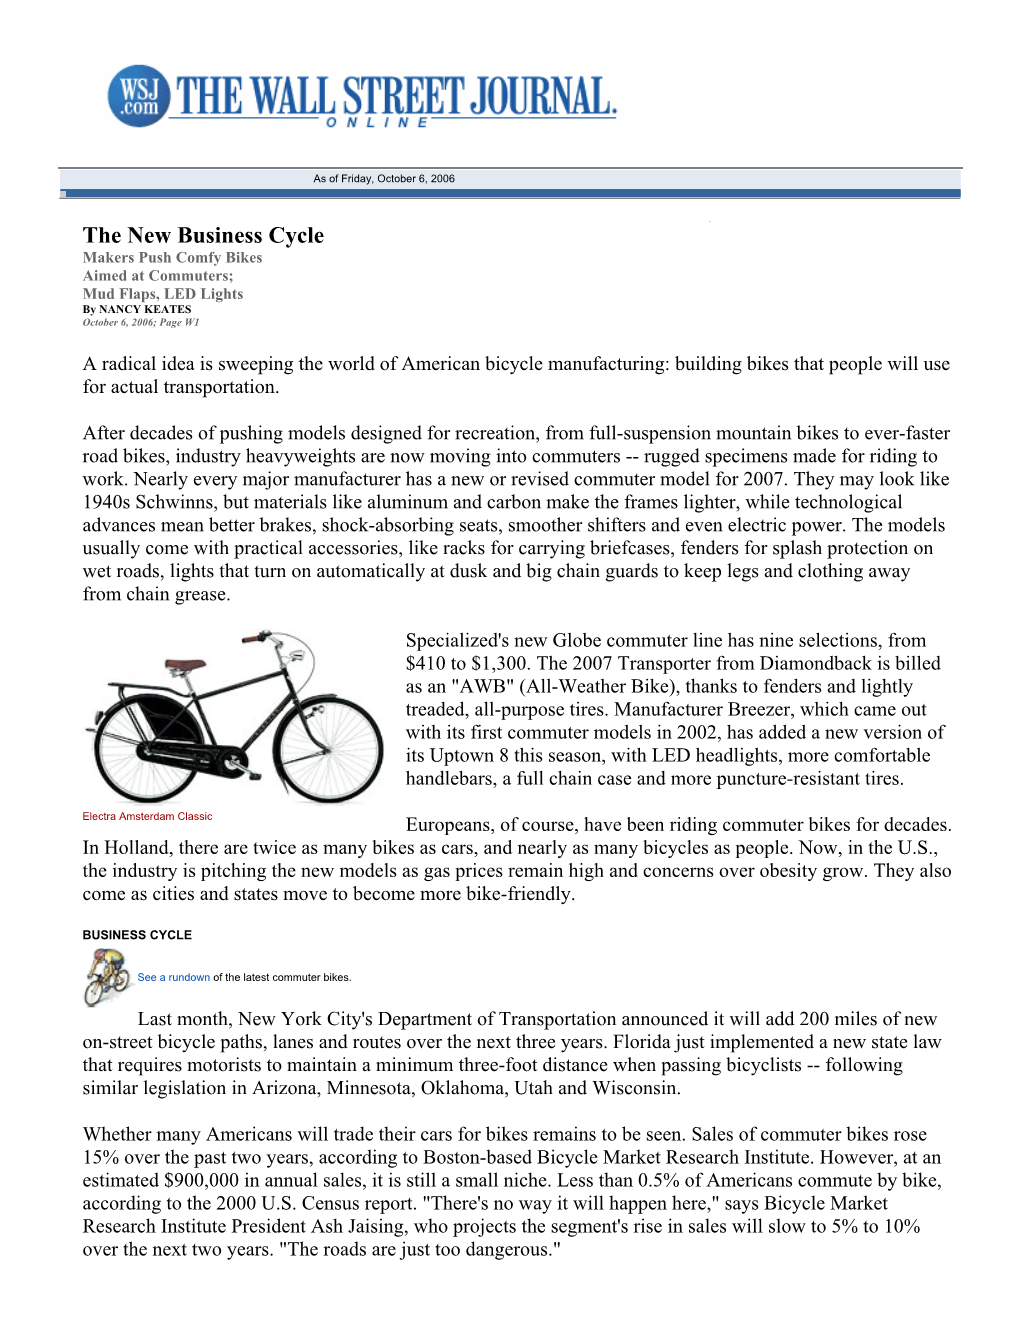 The New Business Cycle Makers Push Comfy Bikes Aimed at Commuters; Mud Flaps, LED Lights by NANCY KEATES October 6, 2006; Page W1